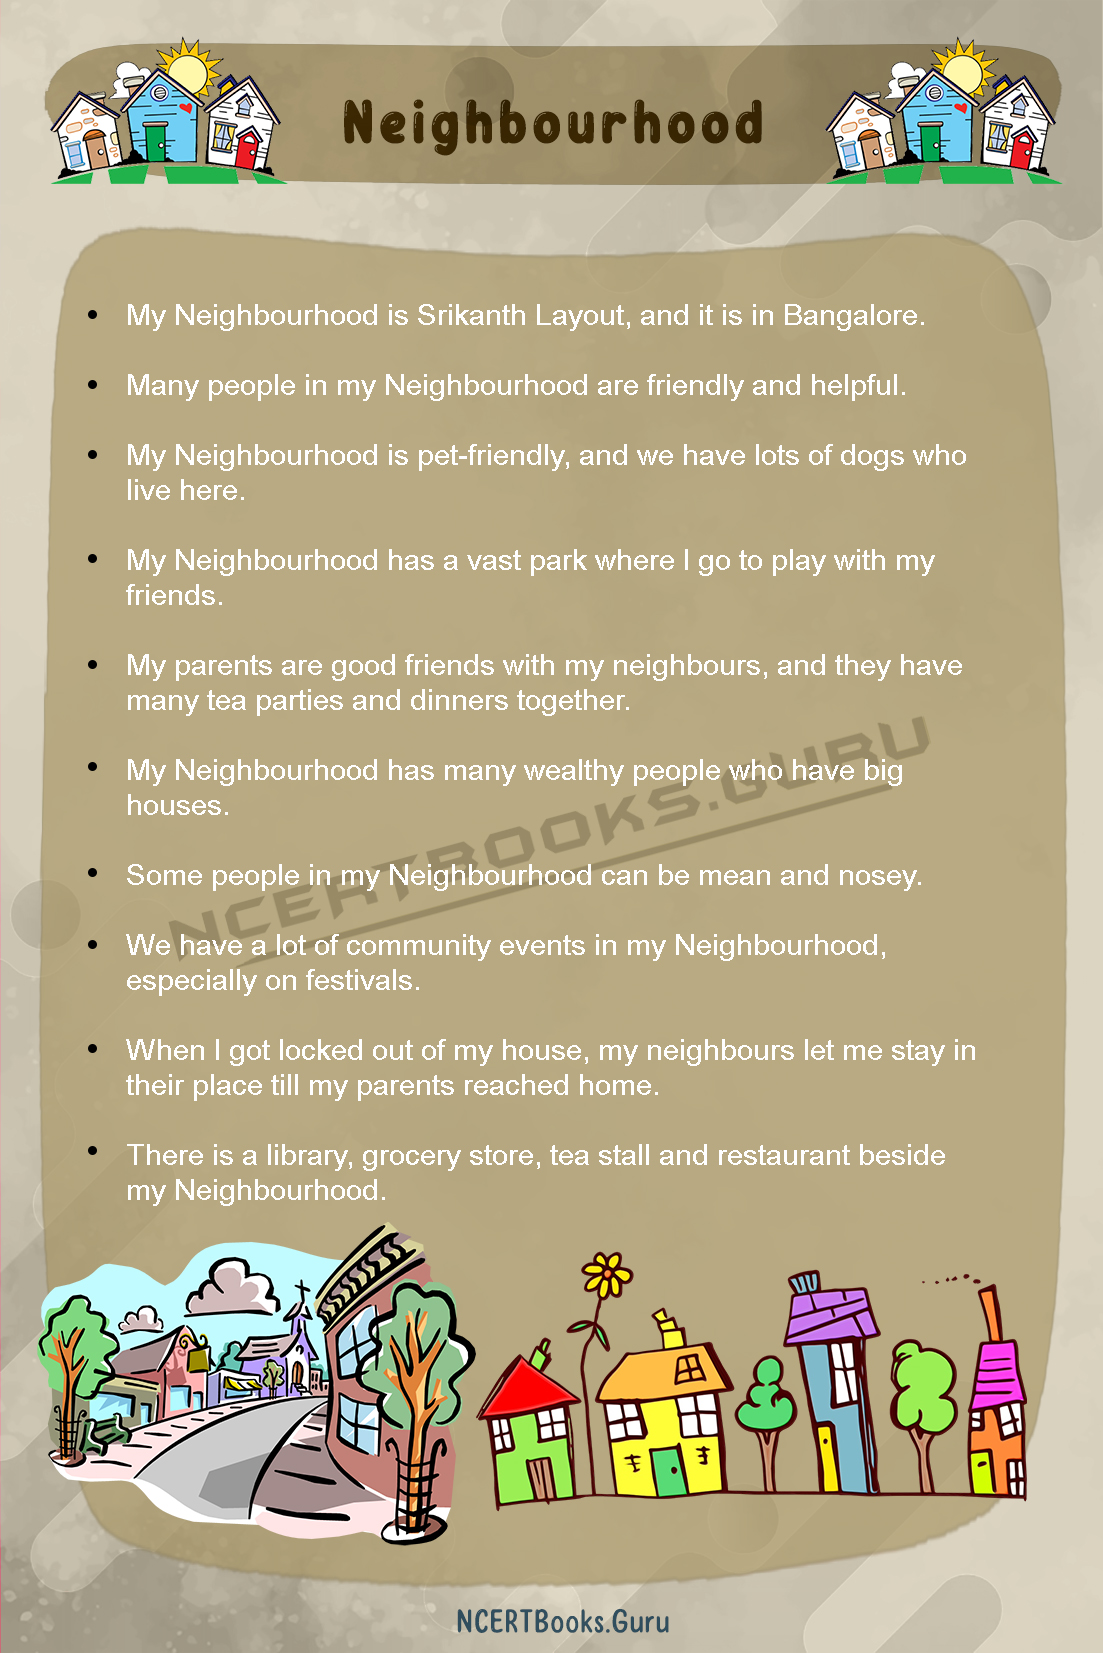 essay about neighborhood in english